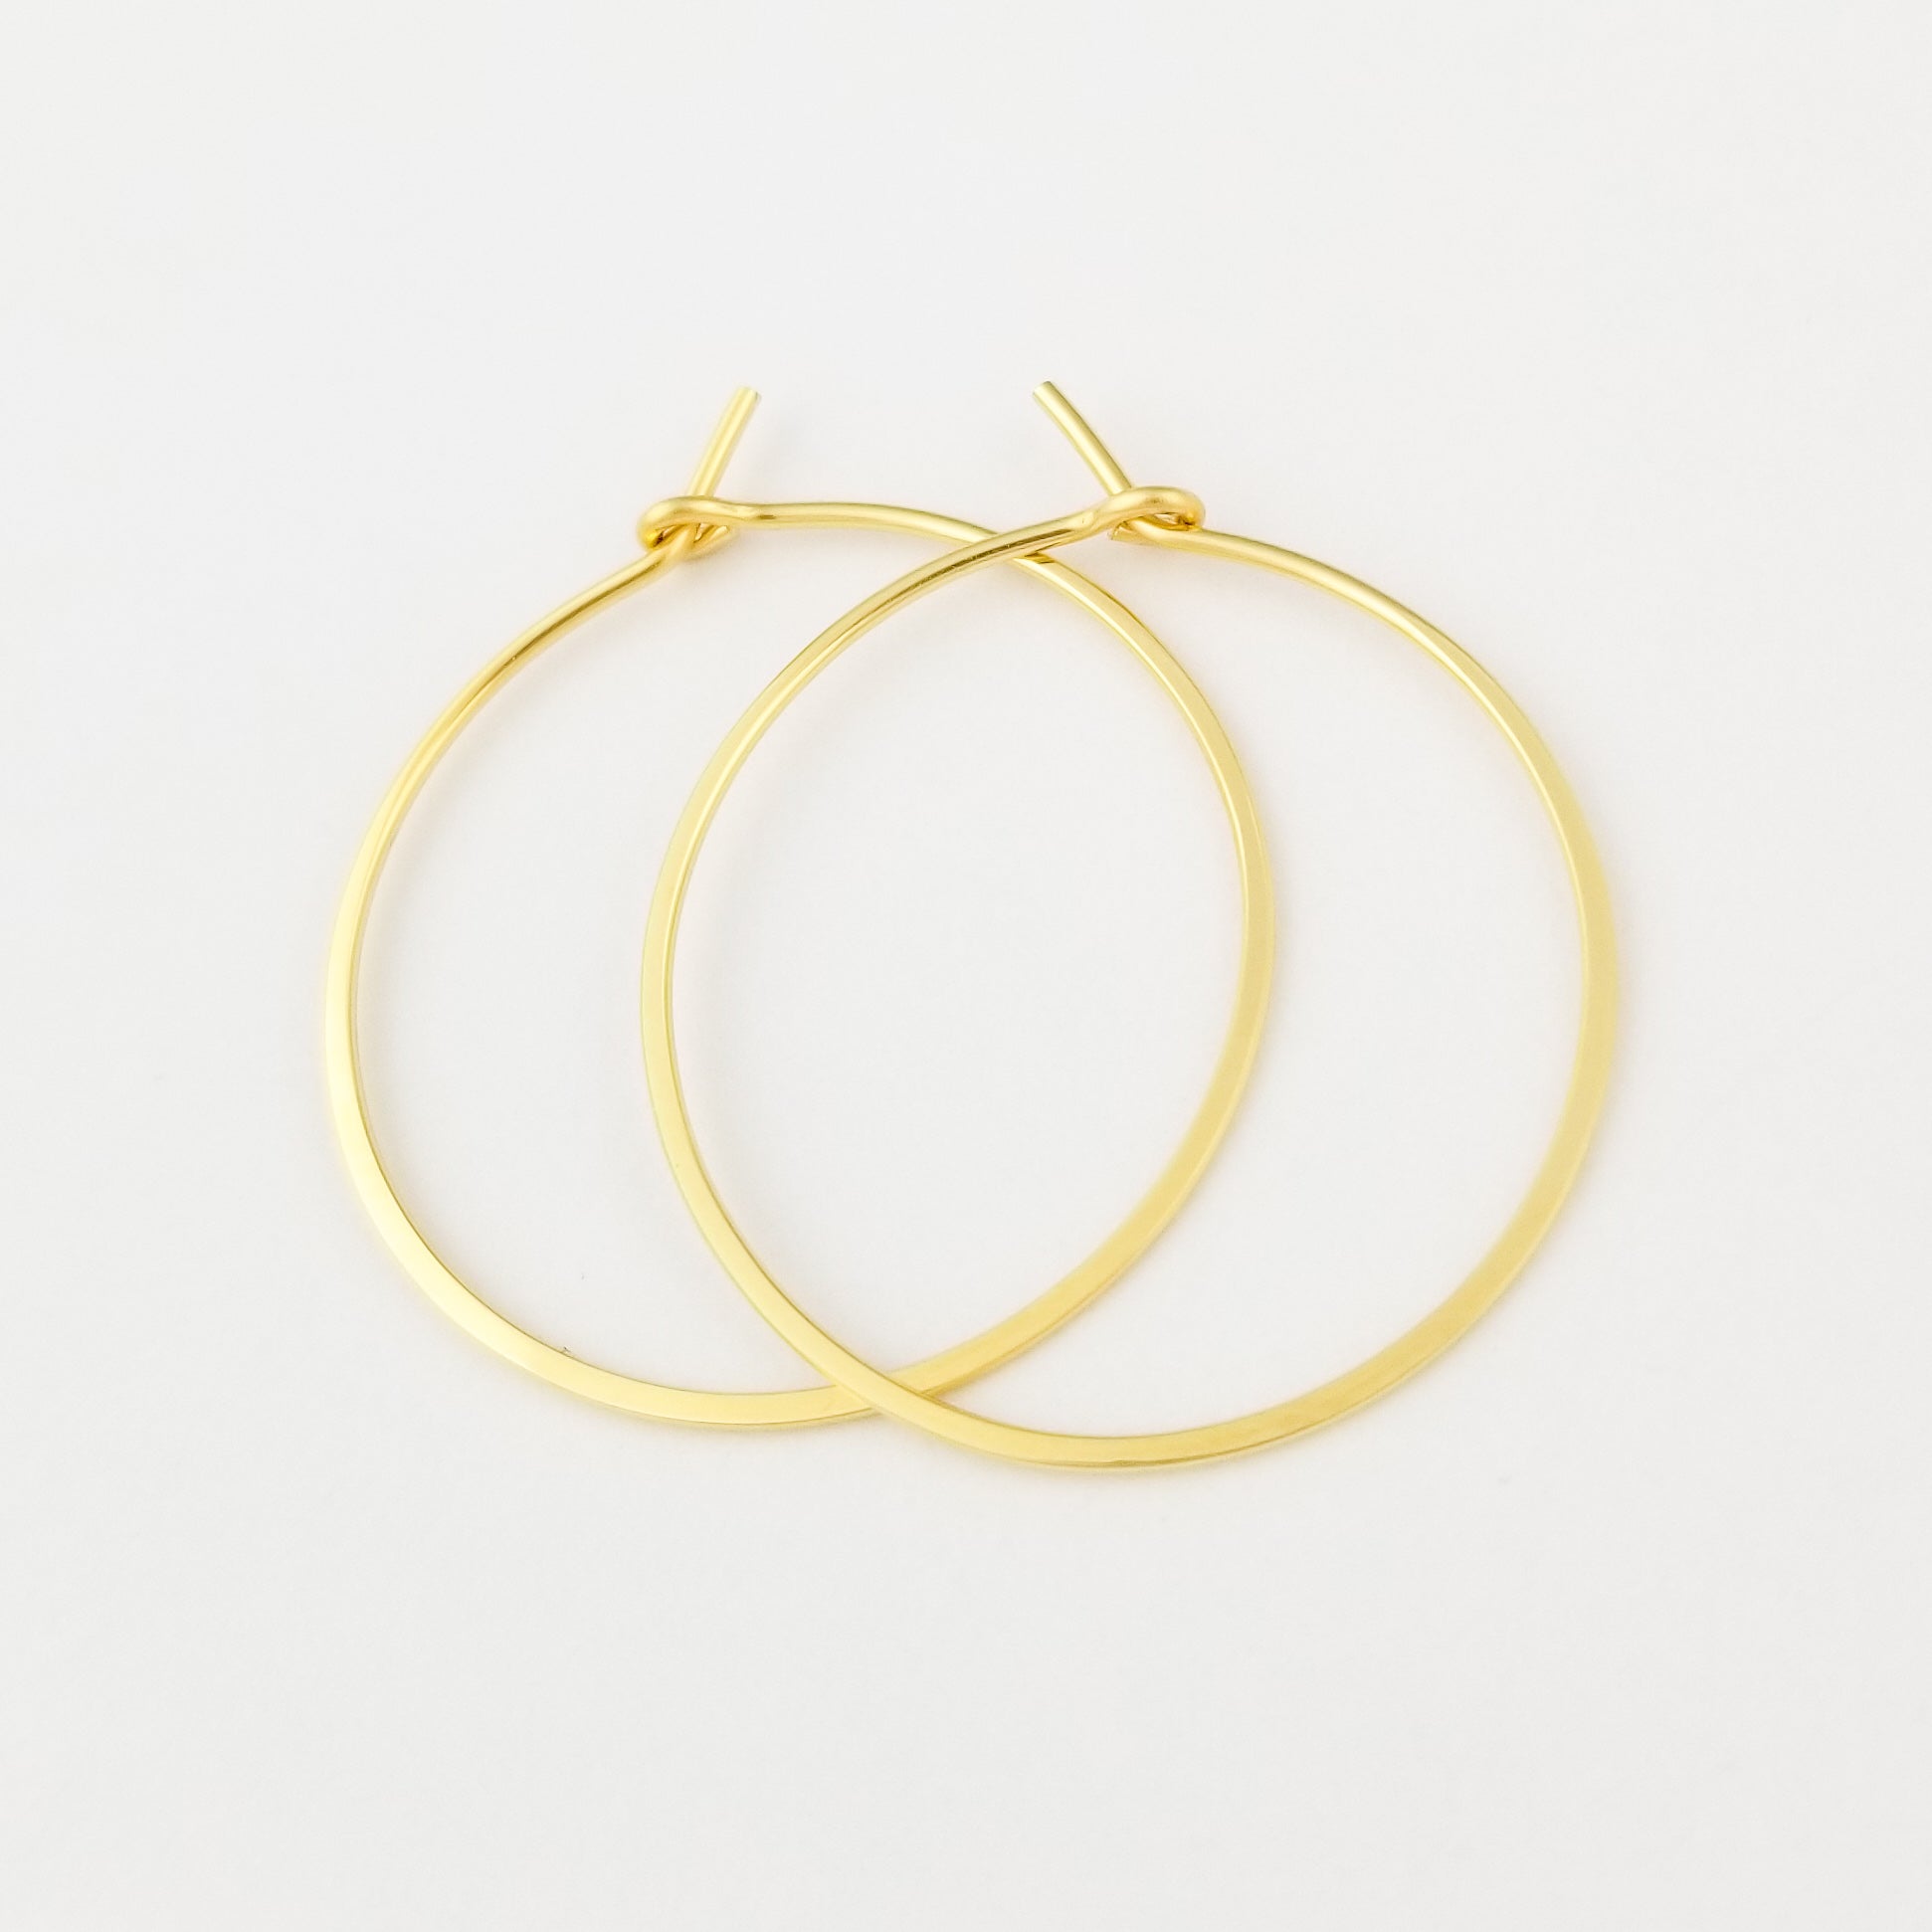 Thin Flat Hammered Gold Hoops Handmade with Solid 18 Karat Yellow Gold on White Background